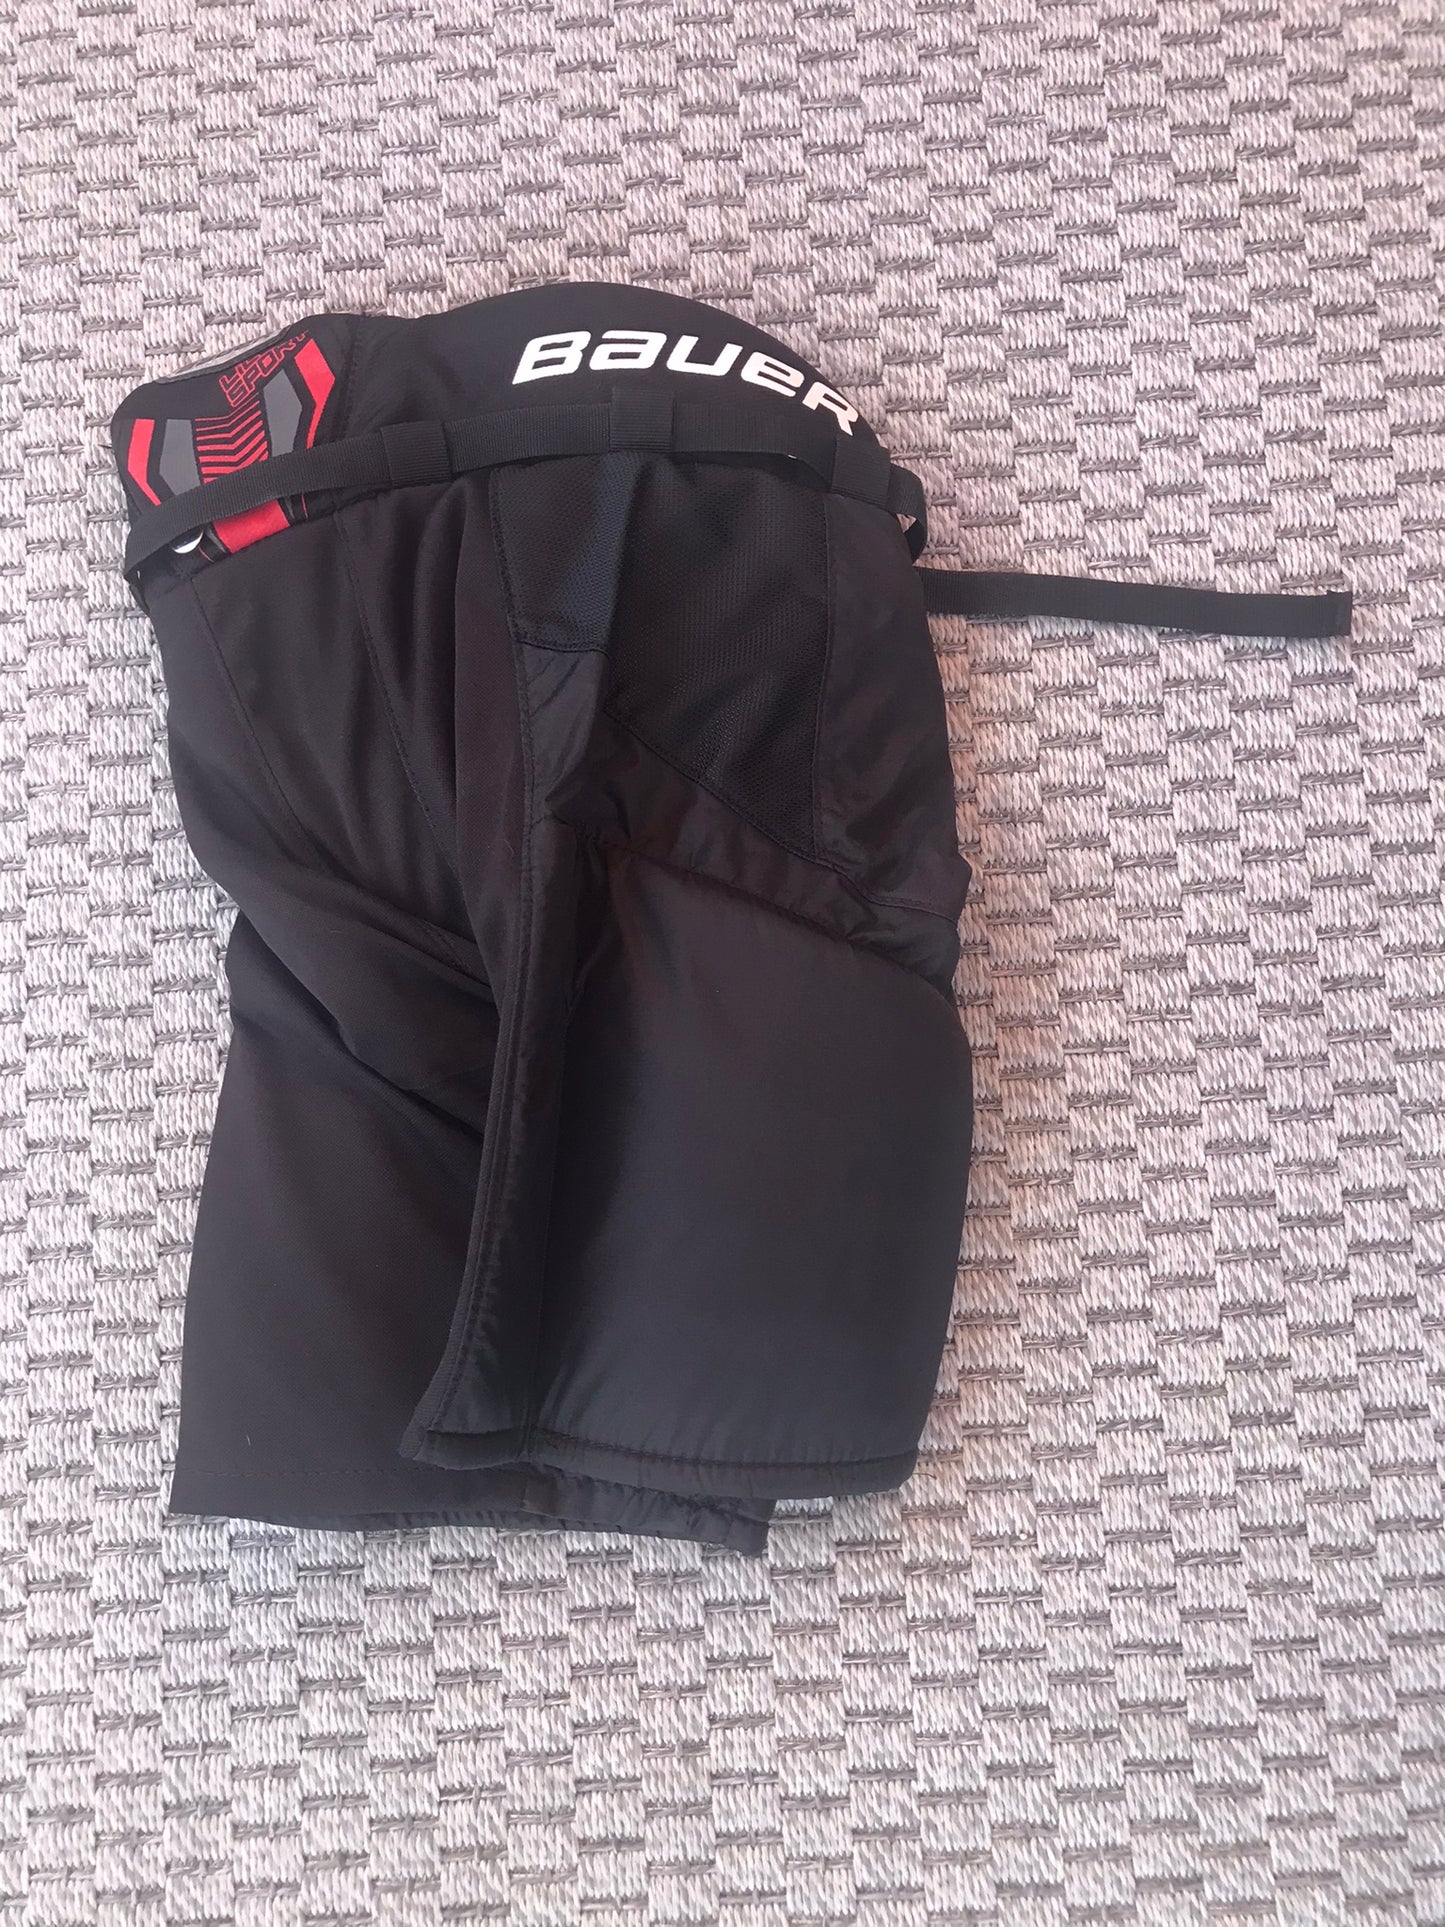 Hockey Pants Child Size Junior Small Bauer Lil Sport Like New